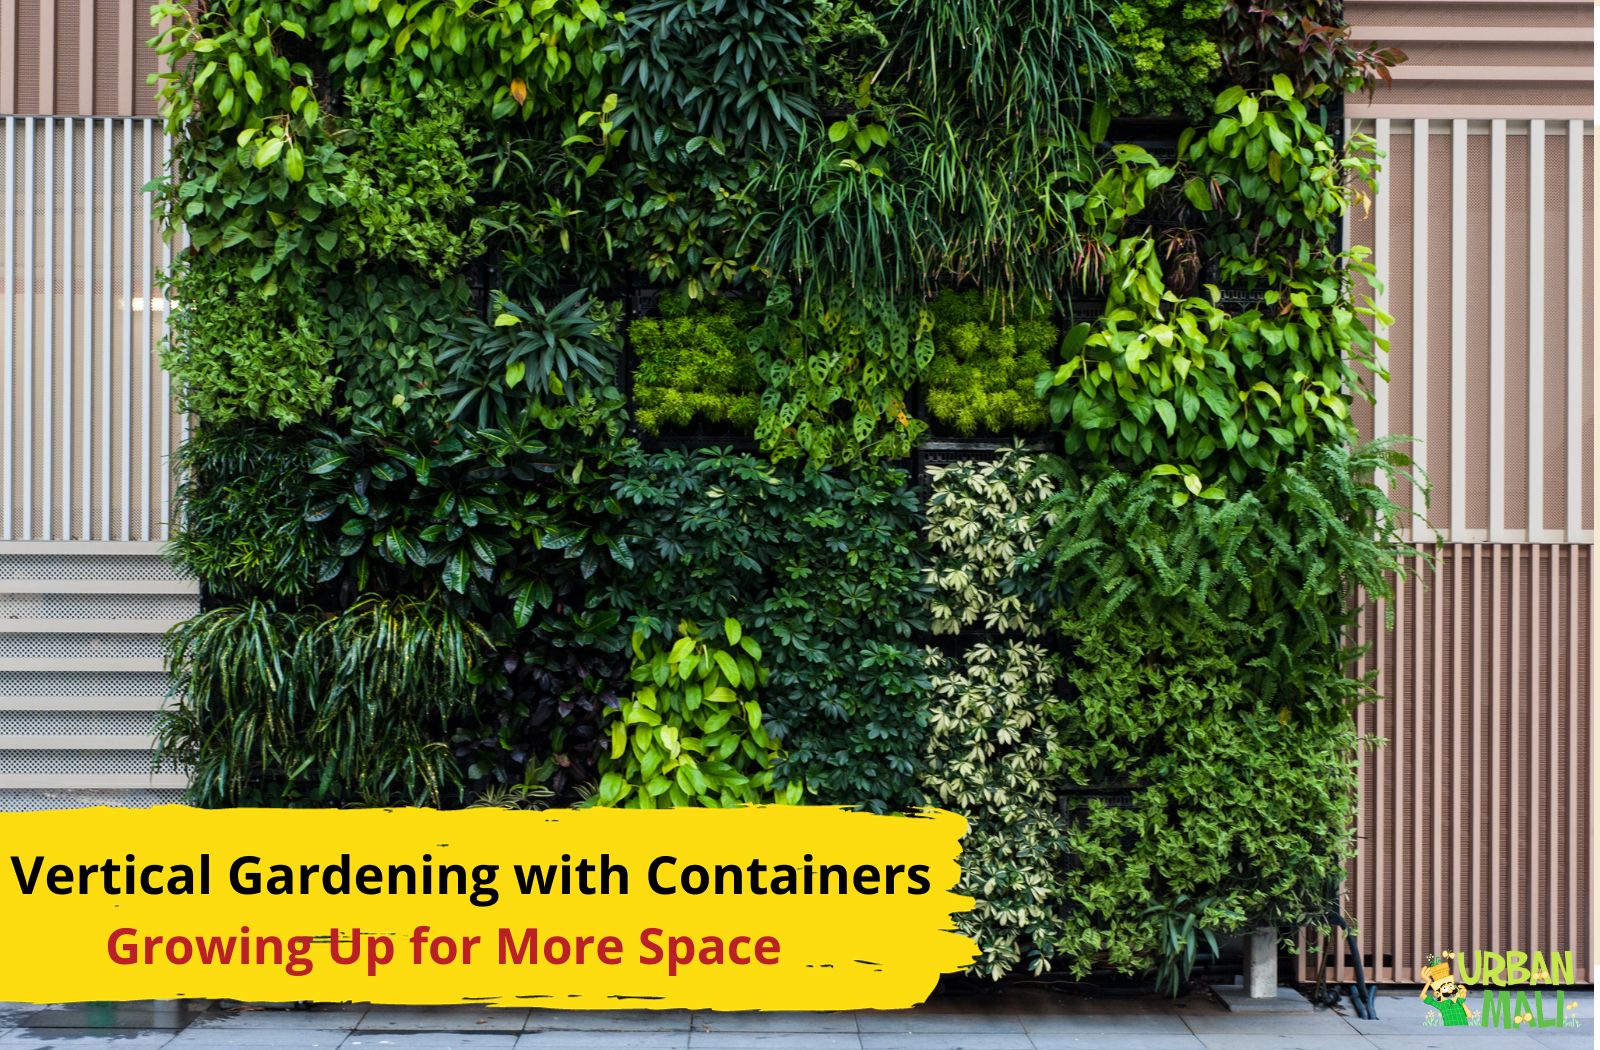 Vertical Gardening with Containers: Growing Up for More Space